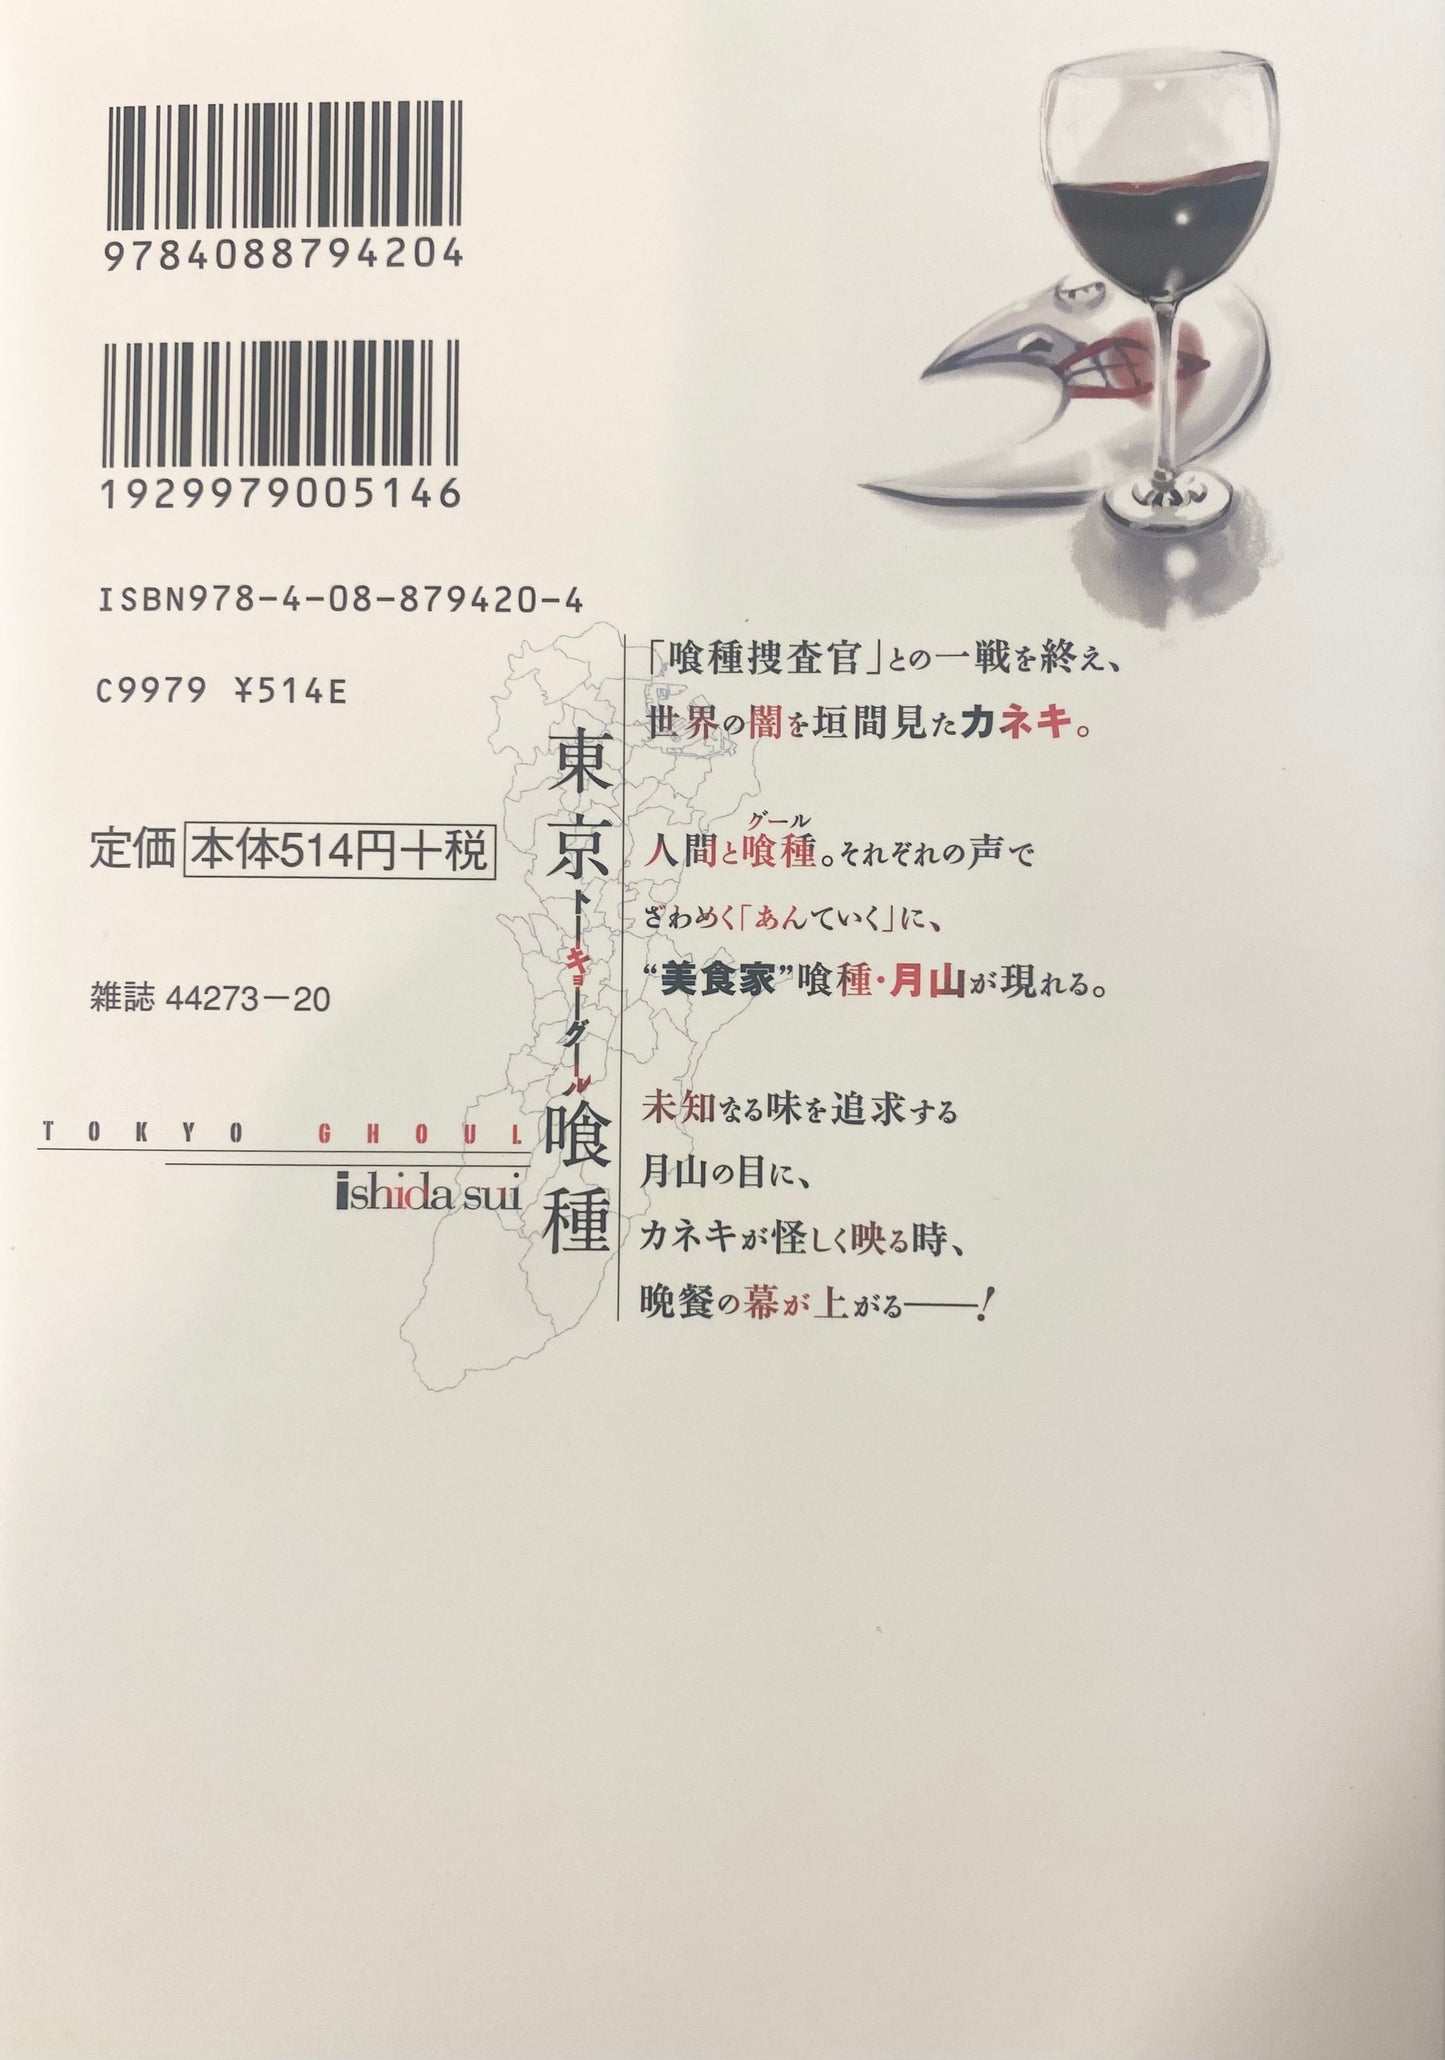 Tokyo Ghoul Vol.4-Official Japanese Edition